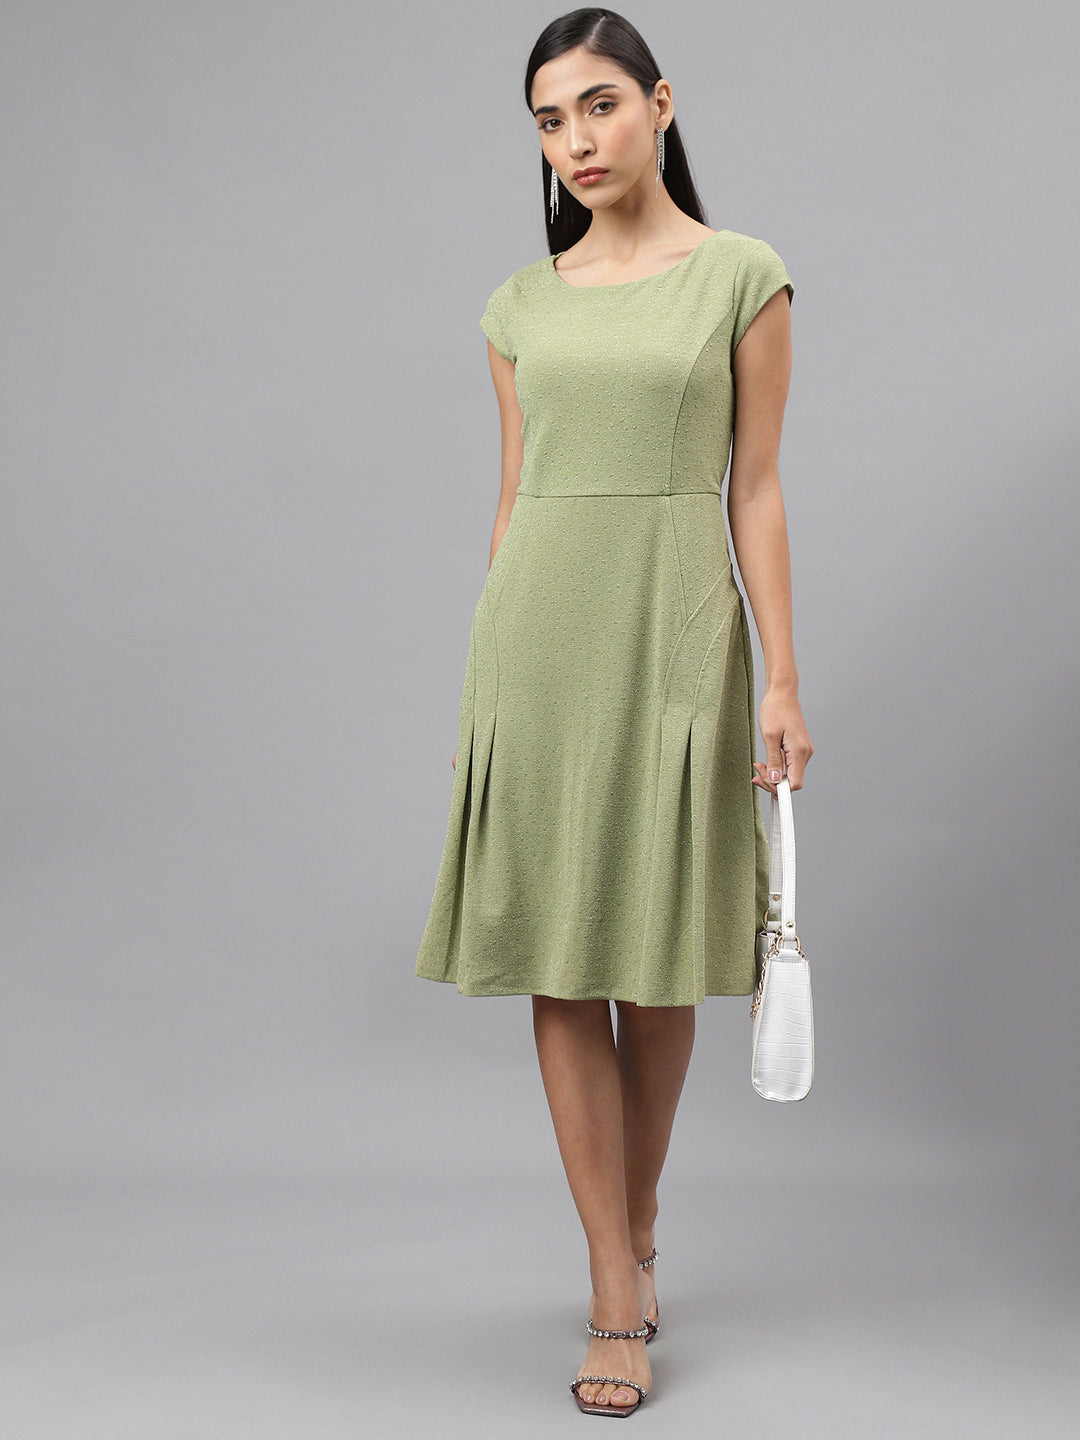 Green Cap Sleeve Round Neck Solid A-Line Dress